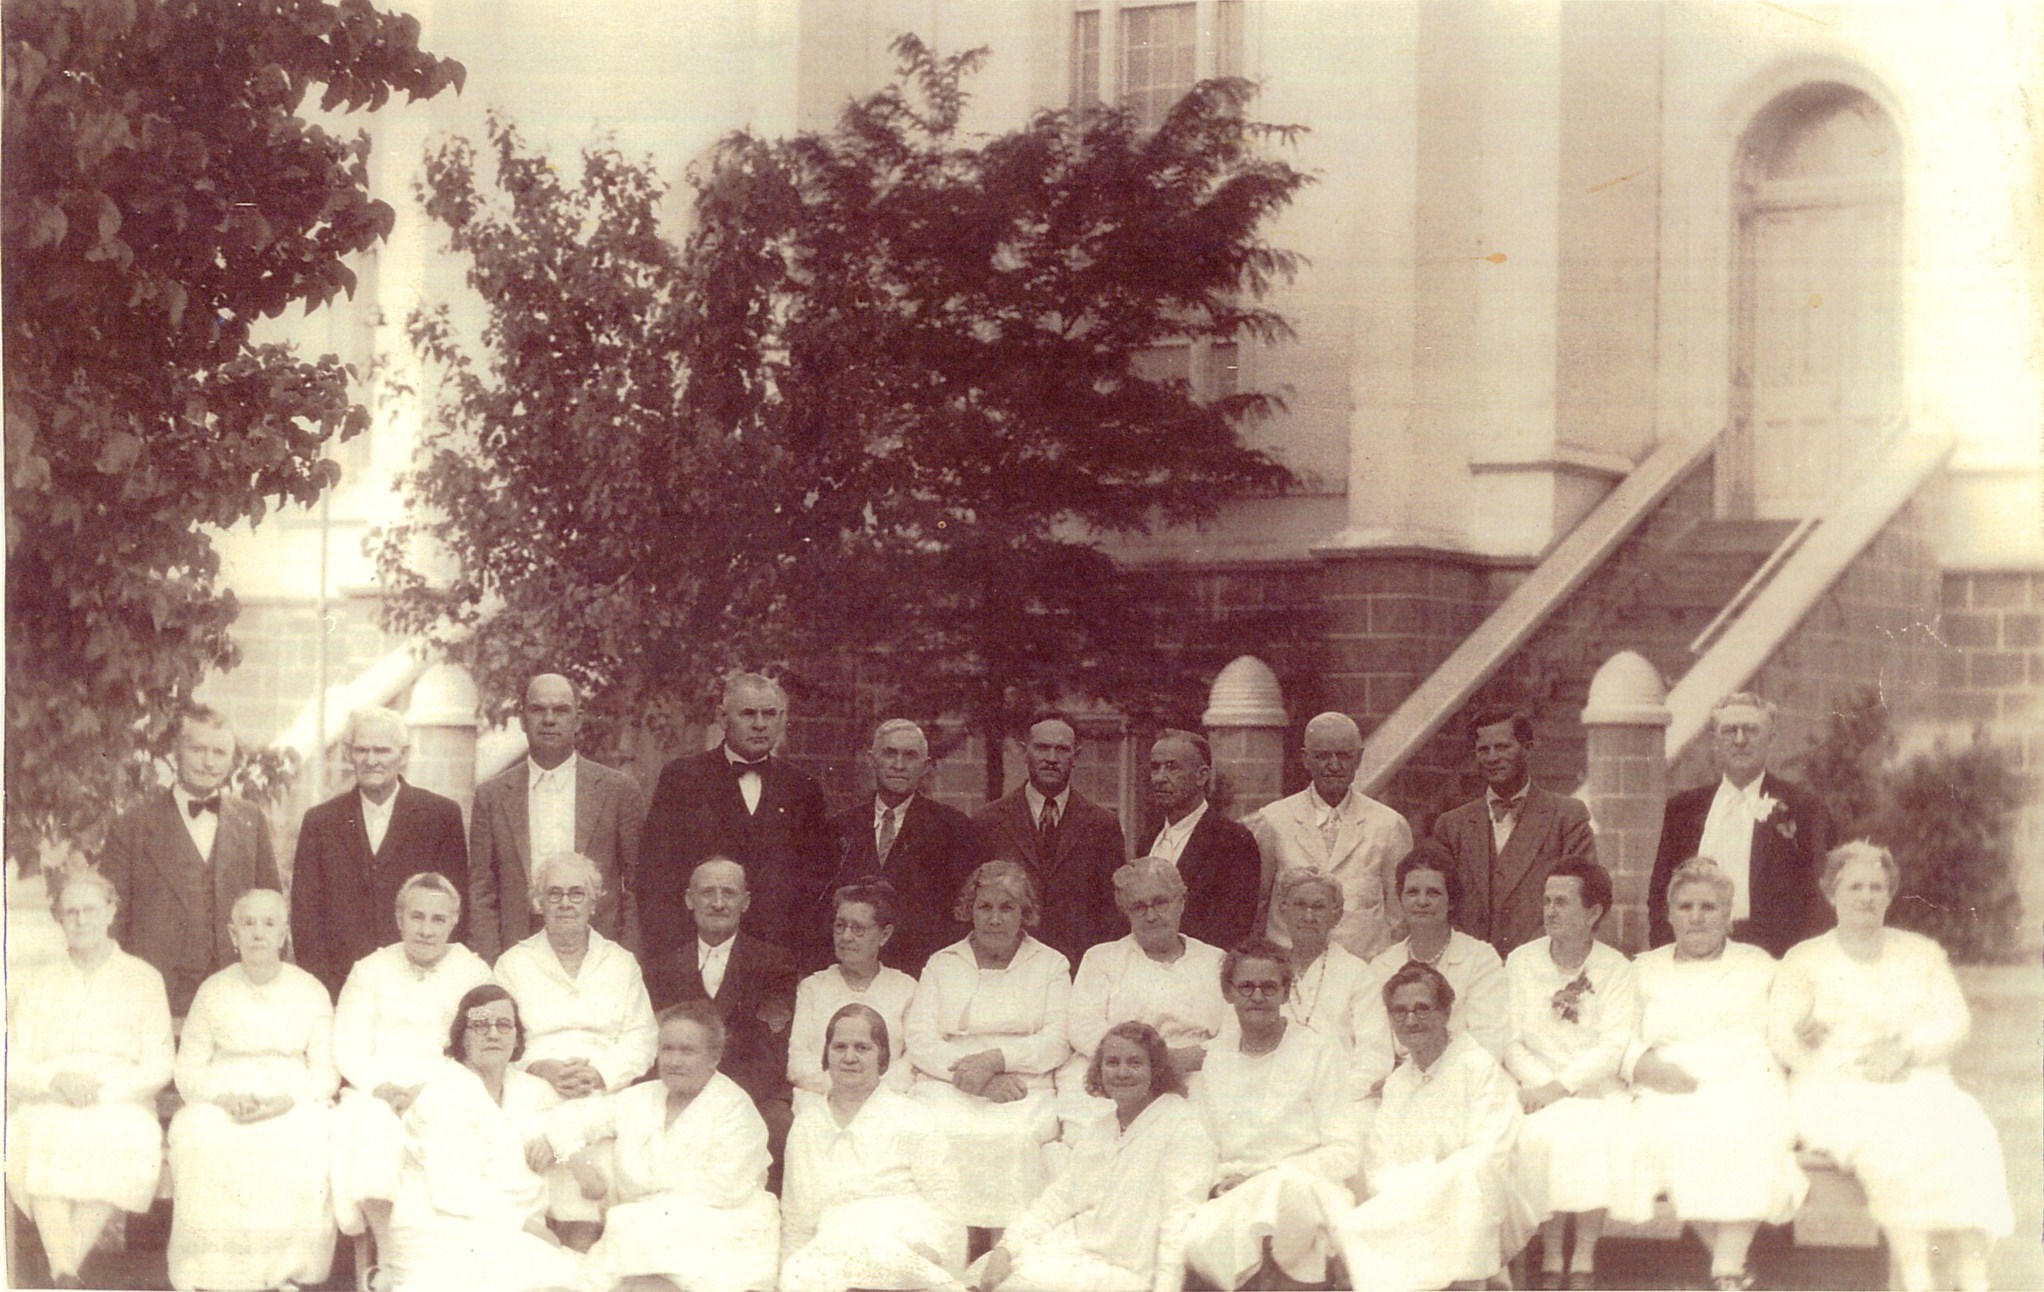 Temple workers in front of the St. George Temple